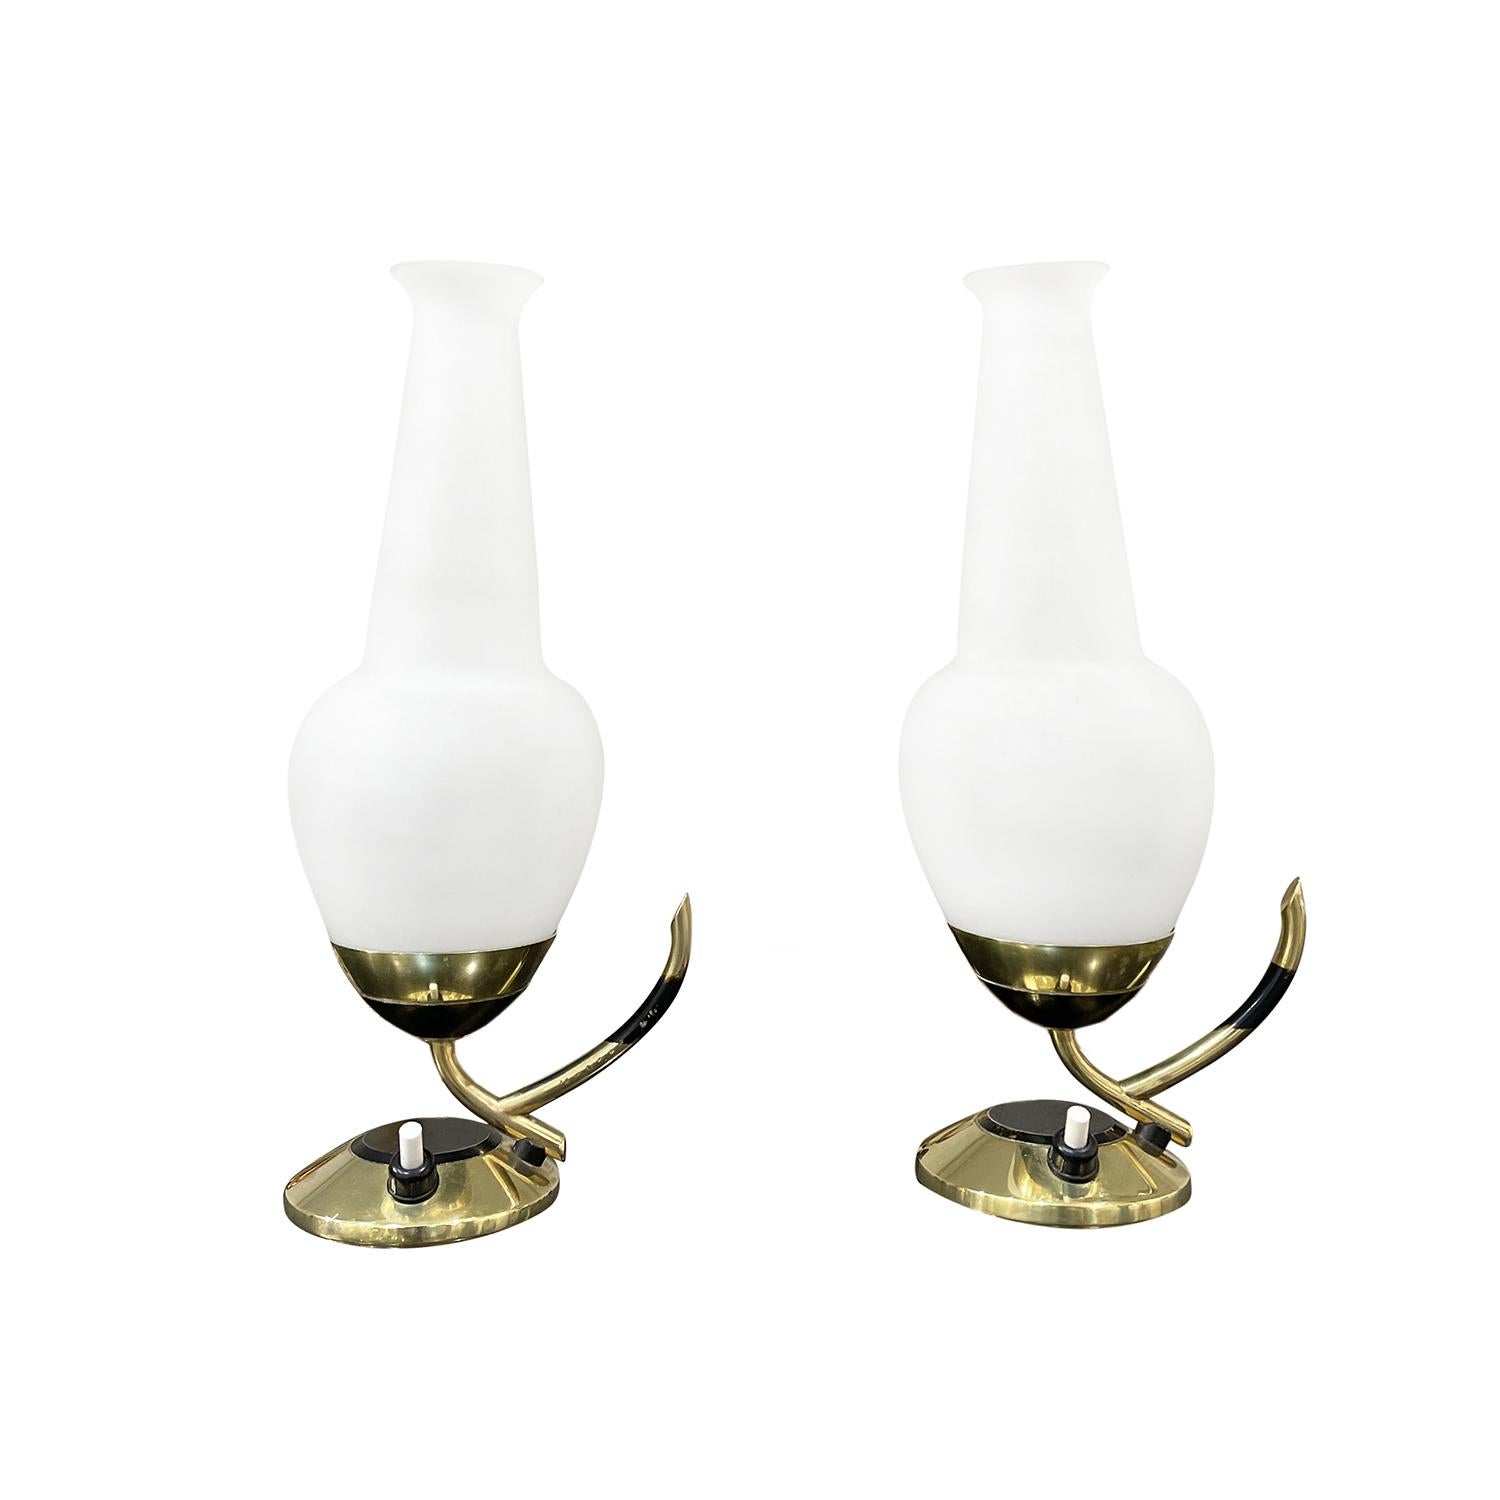 A gold, small vintage Mid-Century Modern Italian pair of table lights made of hand crafted polished brass, designed and produced by Stilnovo in good condition. The tulip glass shades are made of hand blown frosted opaline glass, halted by a round